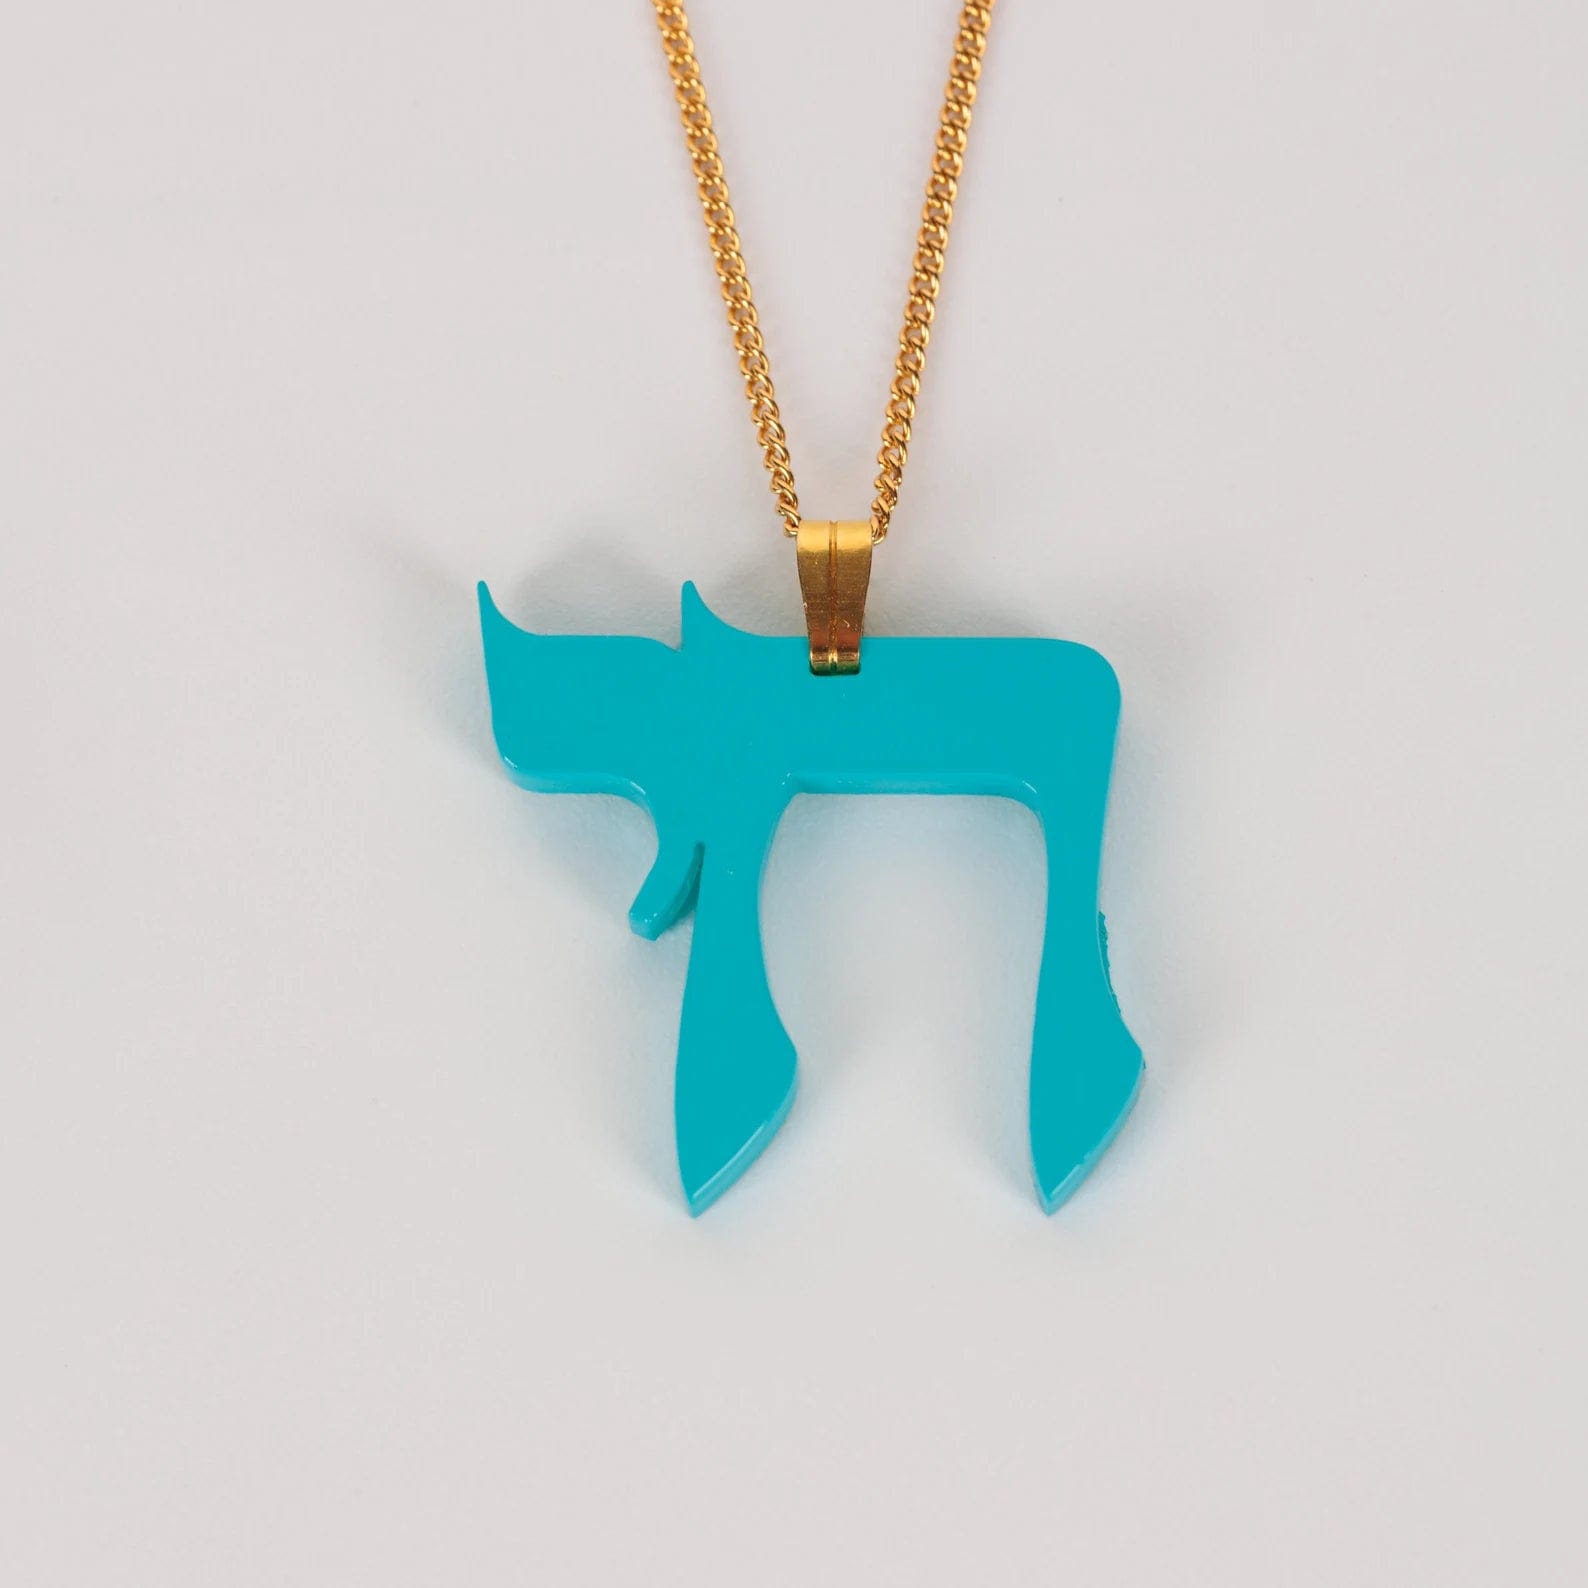 AnssiCandy Necklaces Colorful Chai Necklace - Turquoise